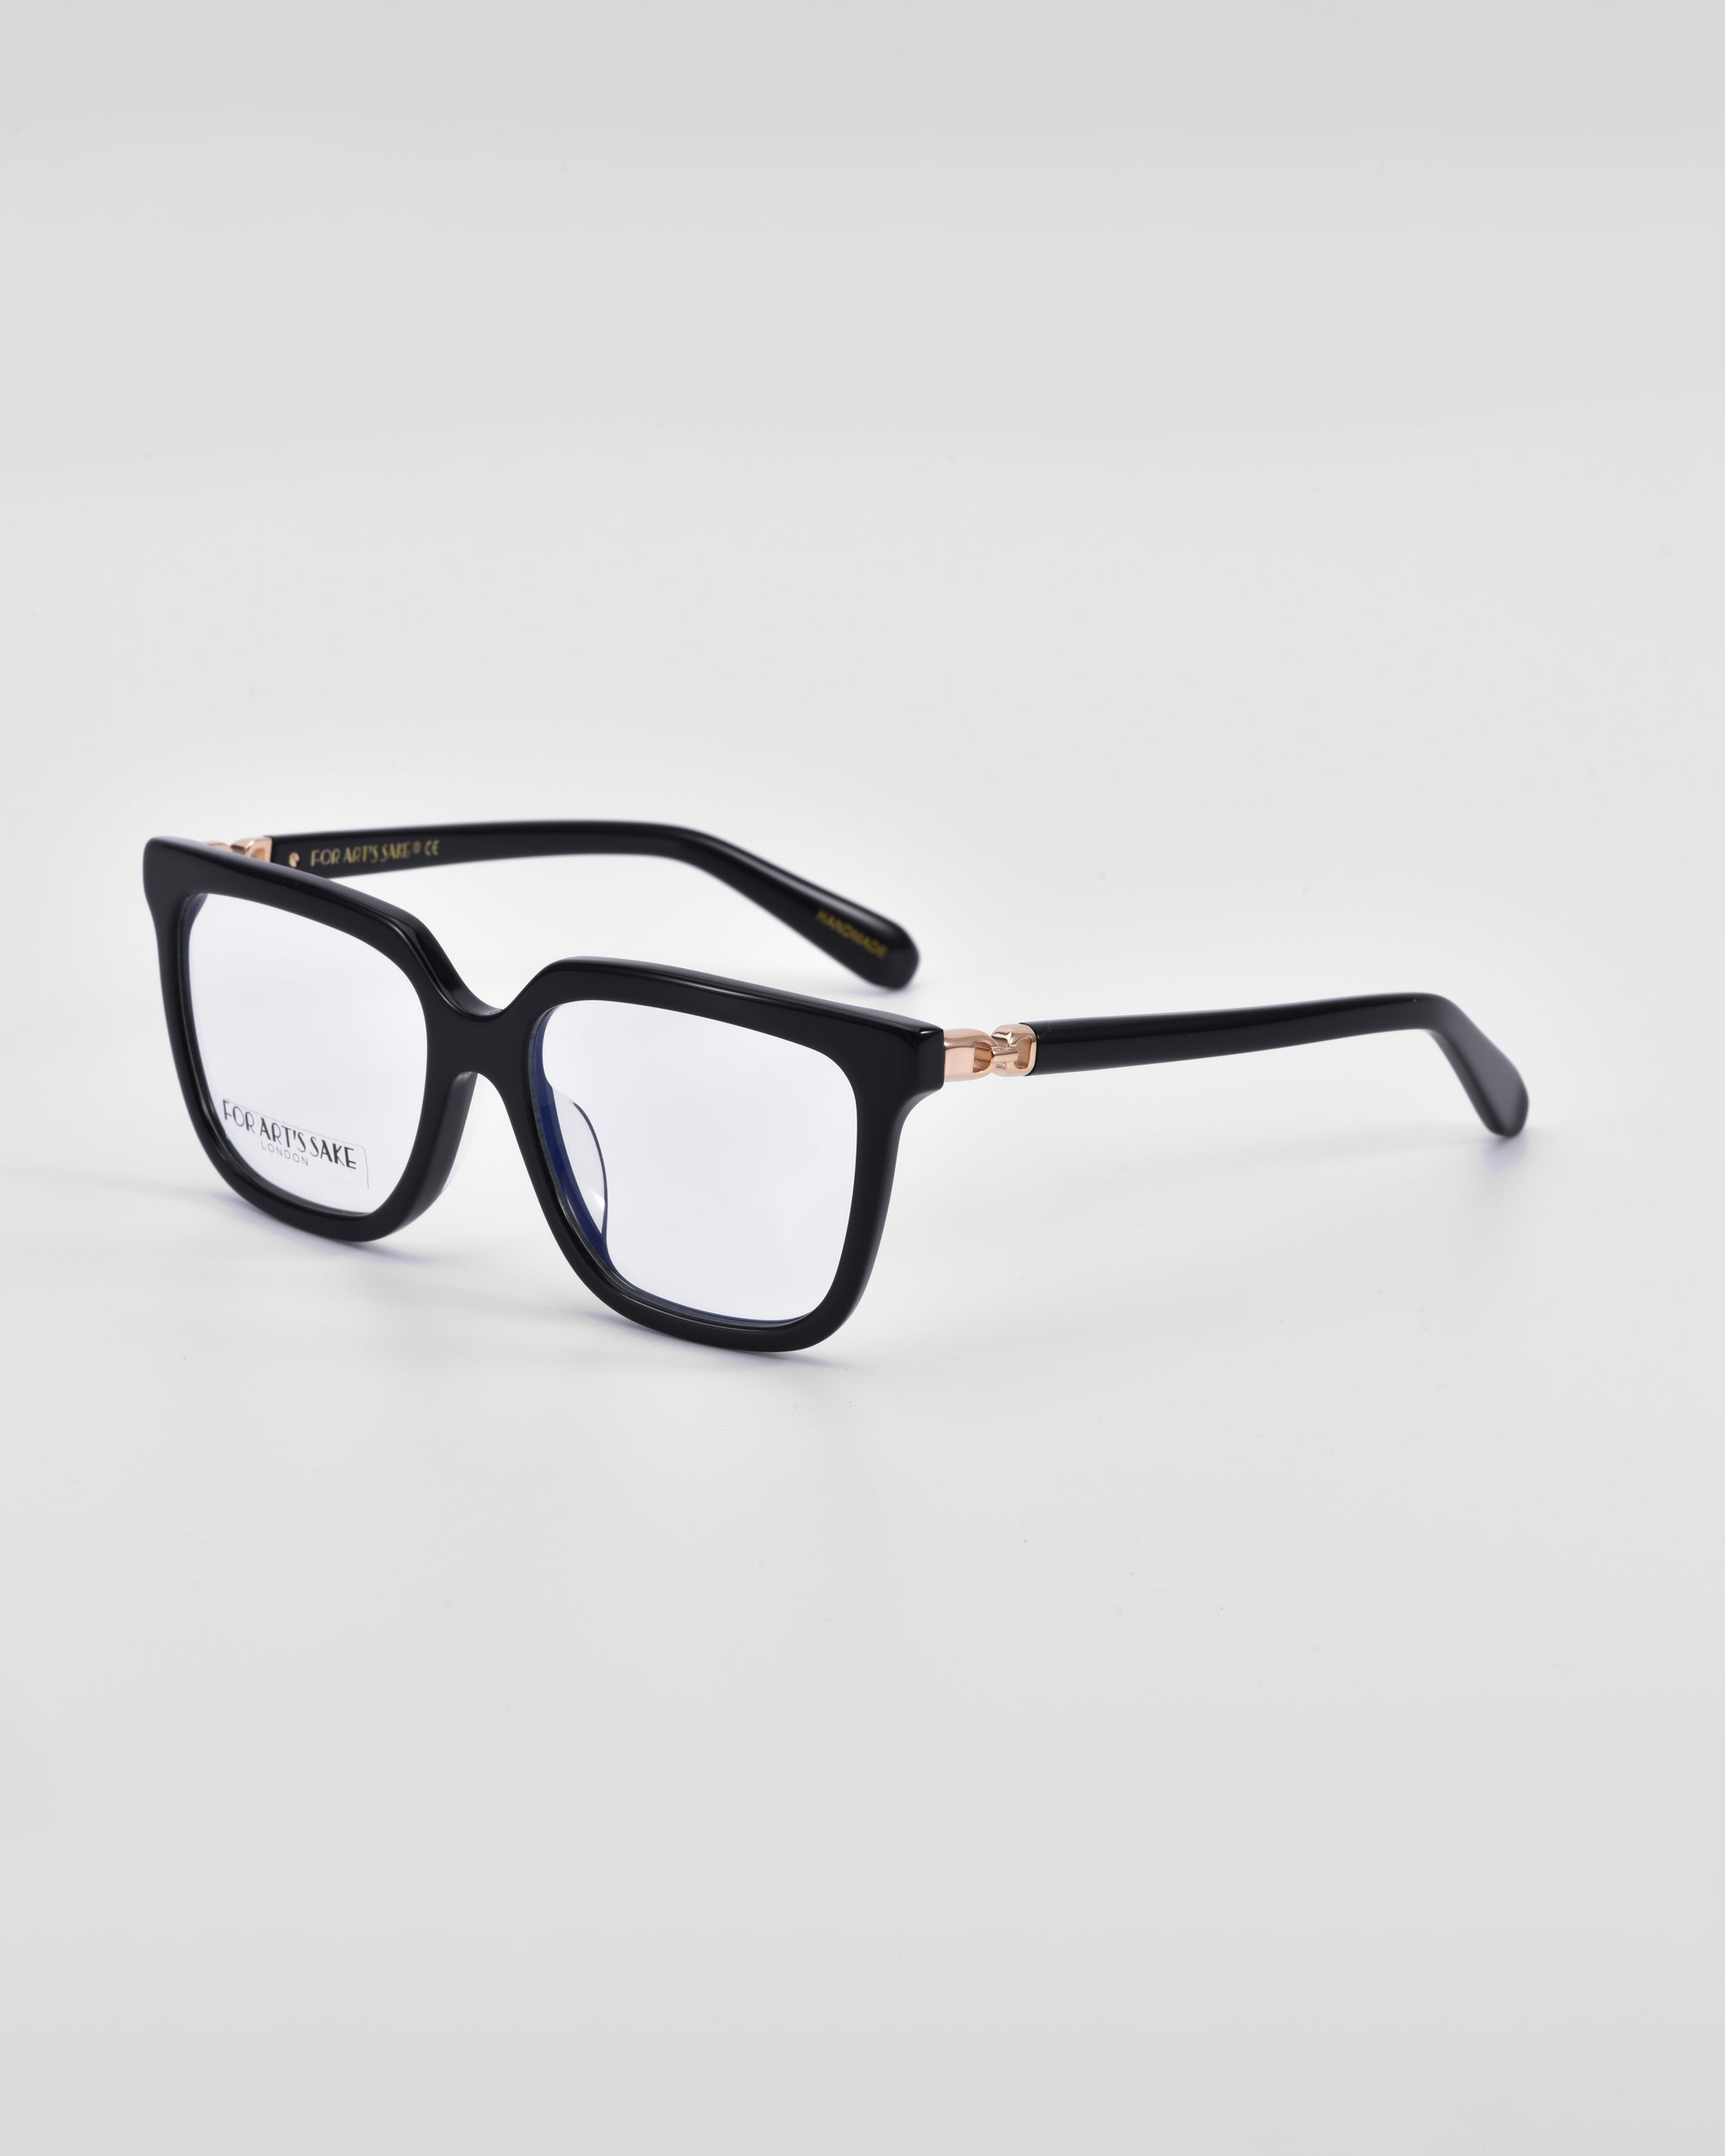 A pair of black rectangular eyeglasses with thick frames is shown on a plain white background. The glasses feature clear lenses and a small 18-karat gold hinge detail on the temples, combining luxury with a classic square silhouette. These are the Nina by For Art's Sake®.